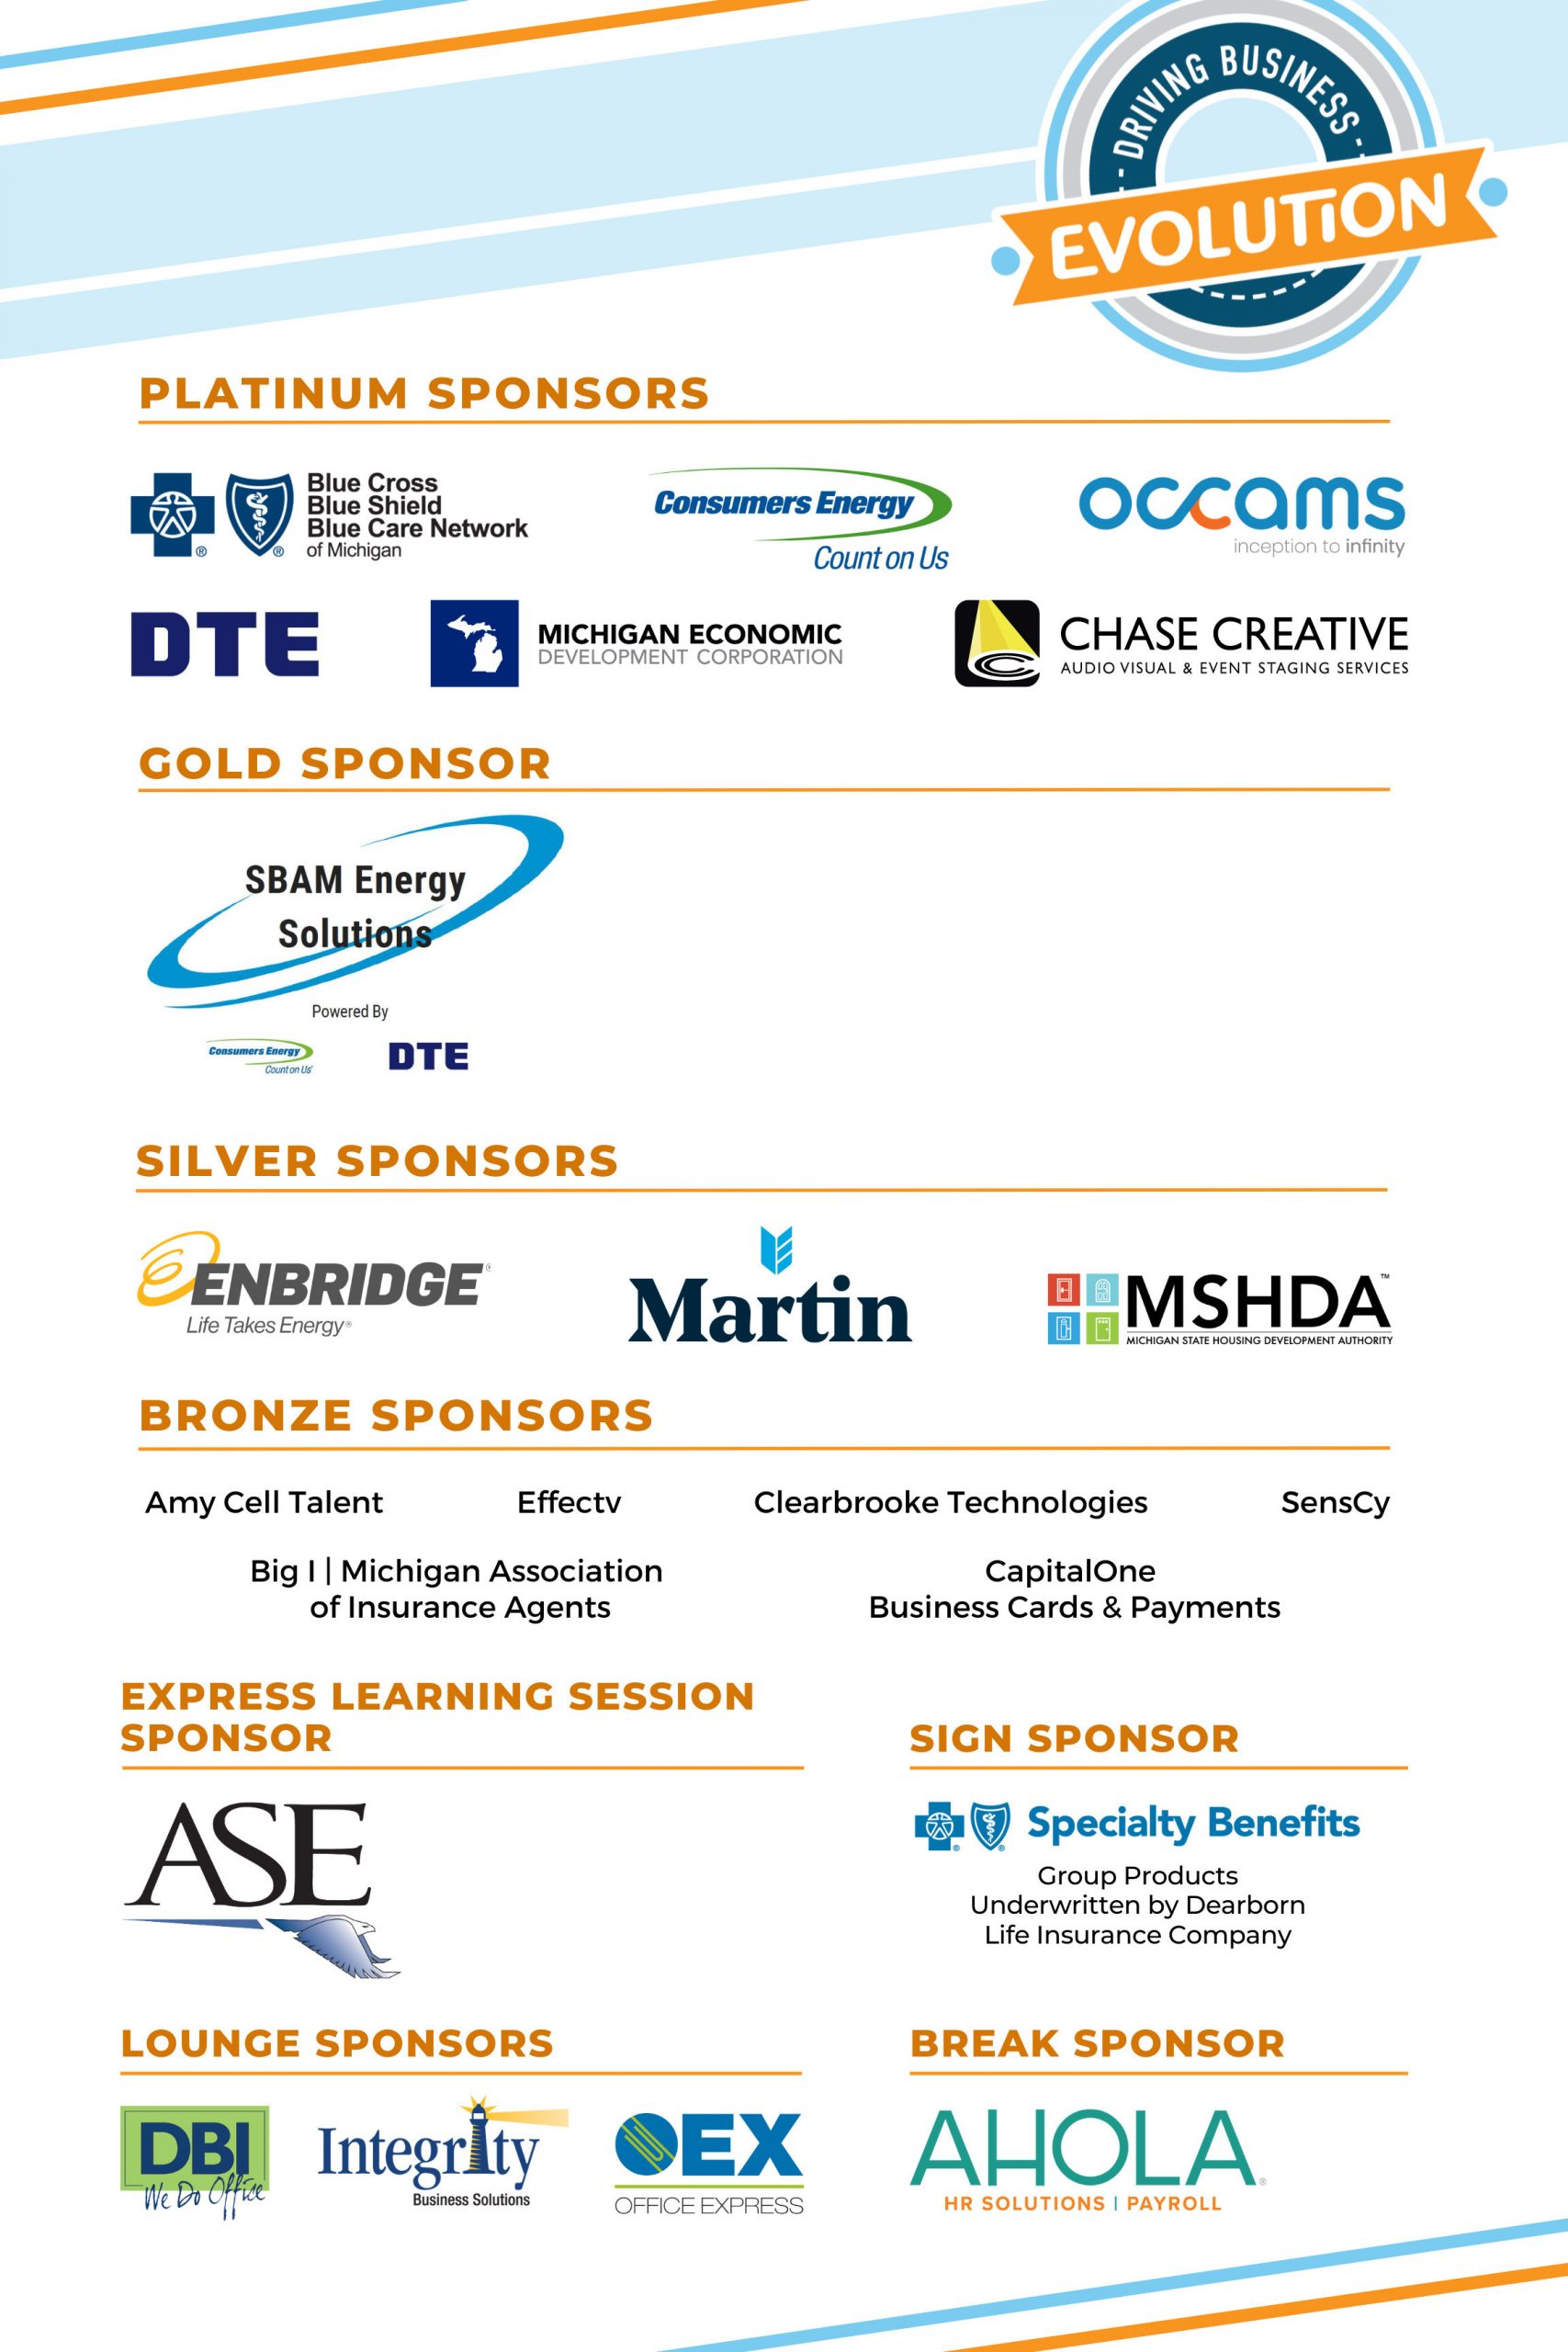 Logos and text depicting the sponsors of SBAM's annual meeting